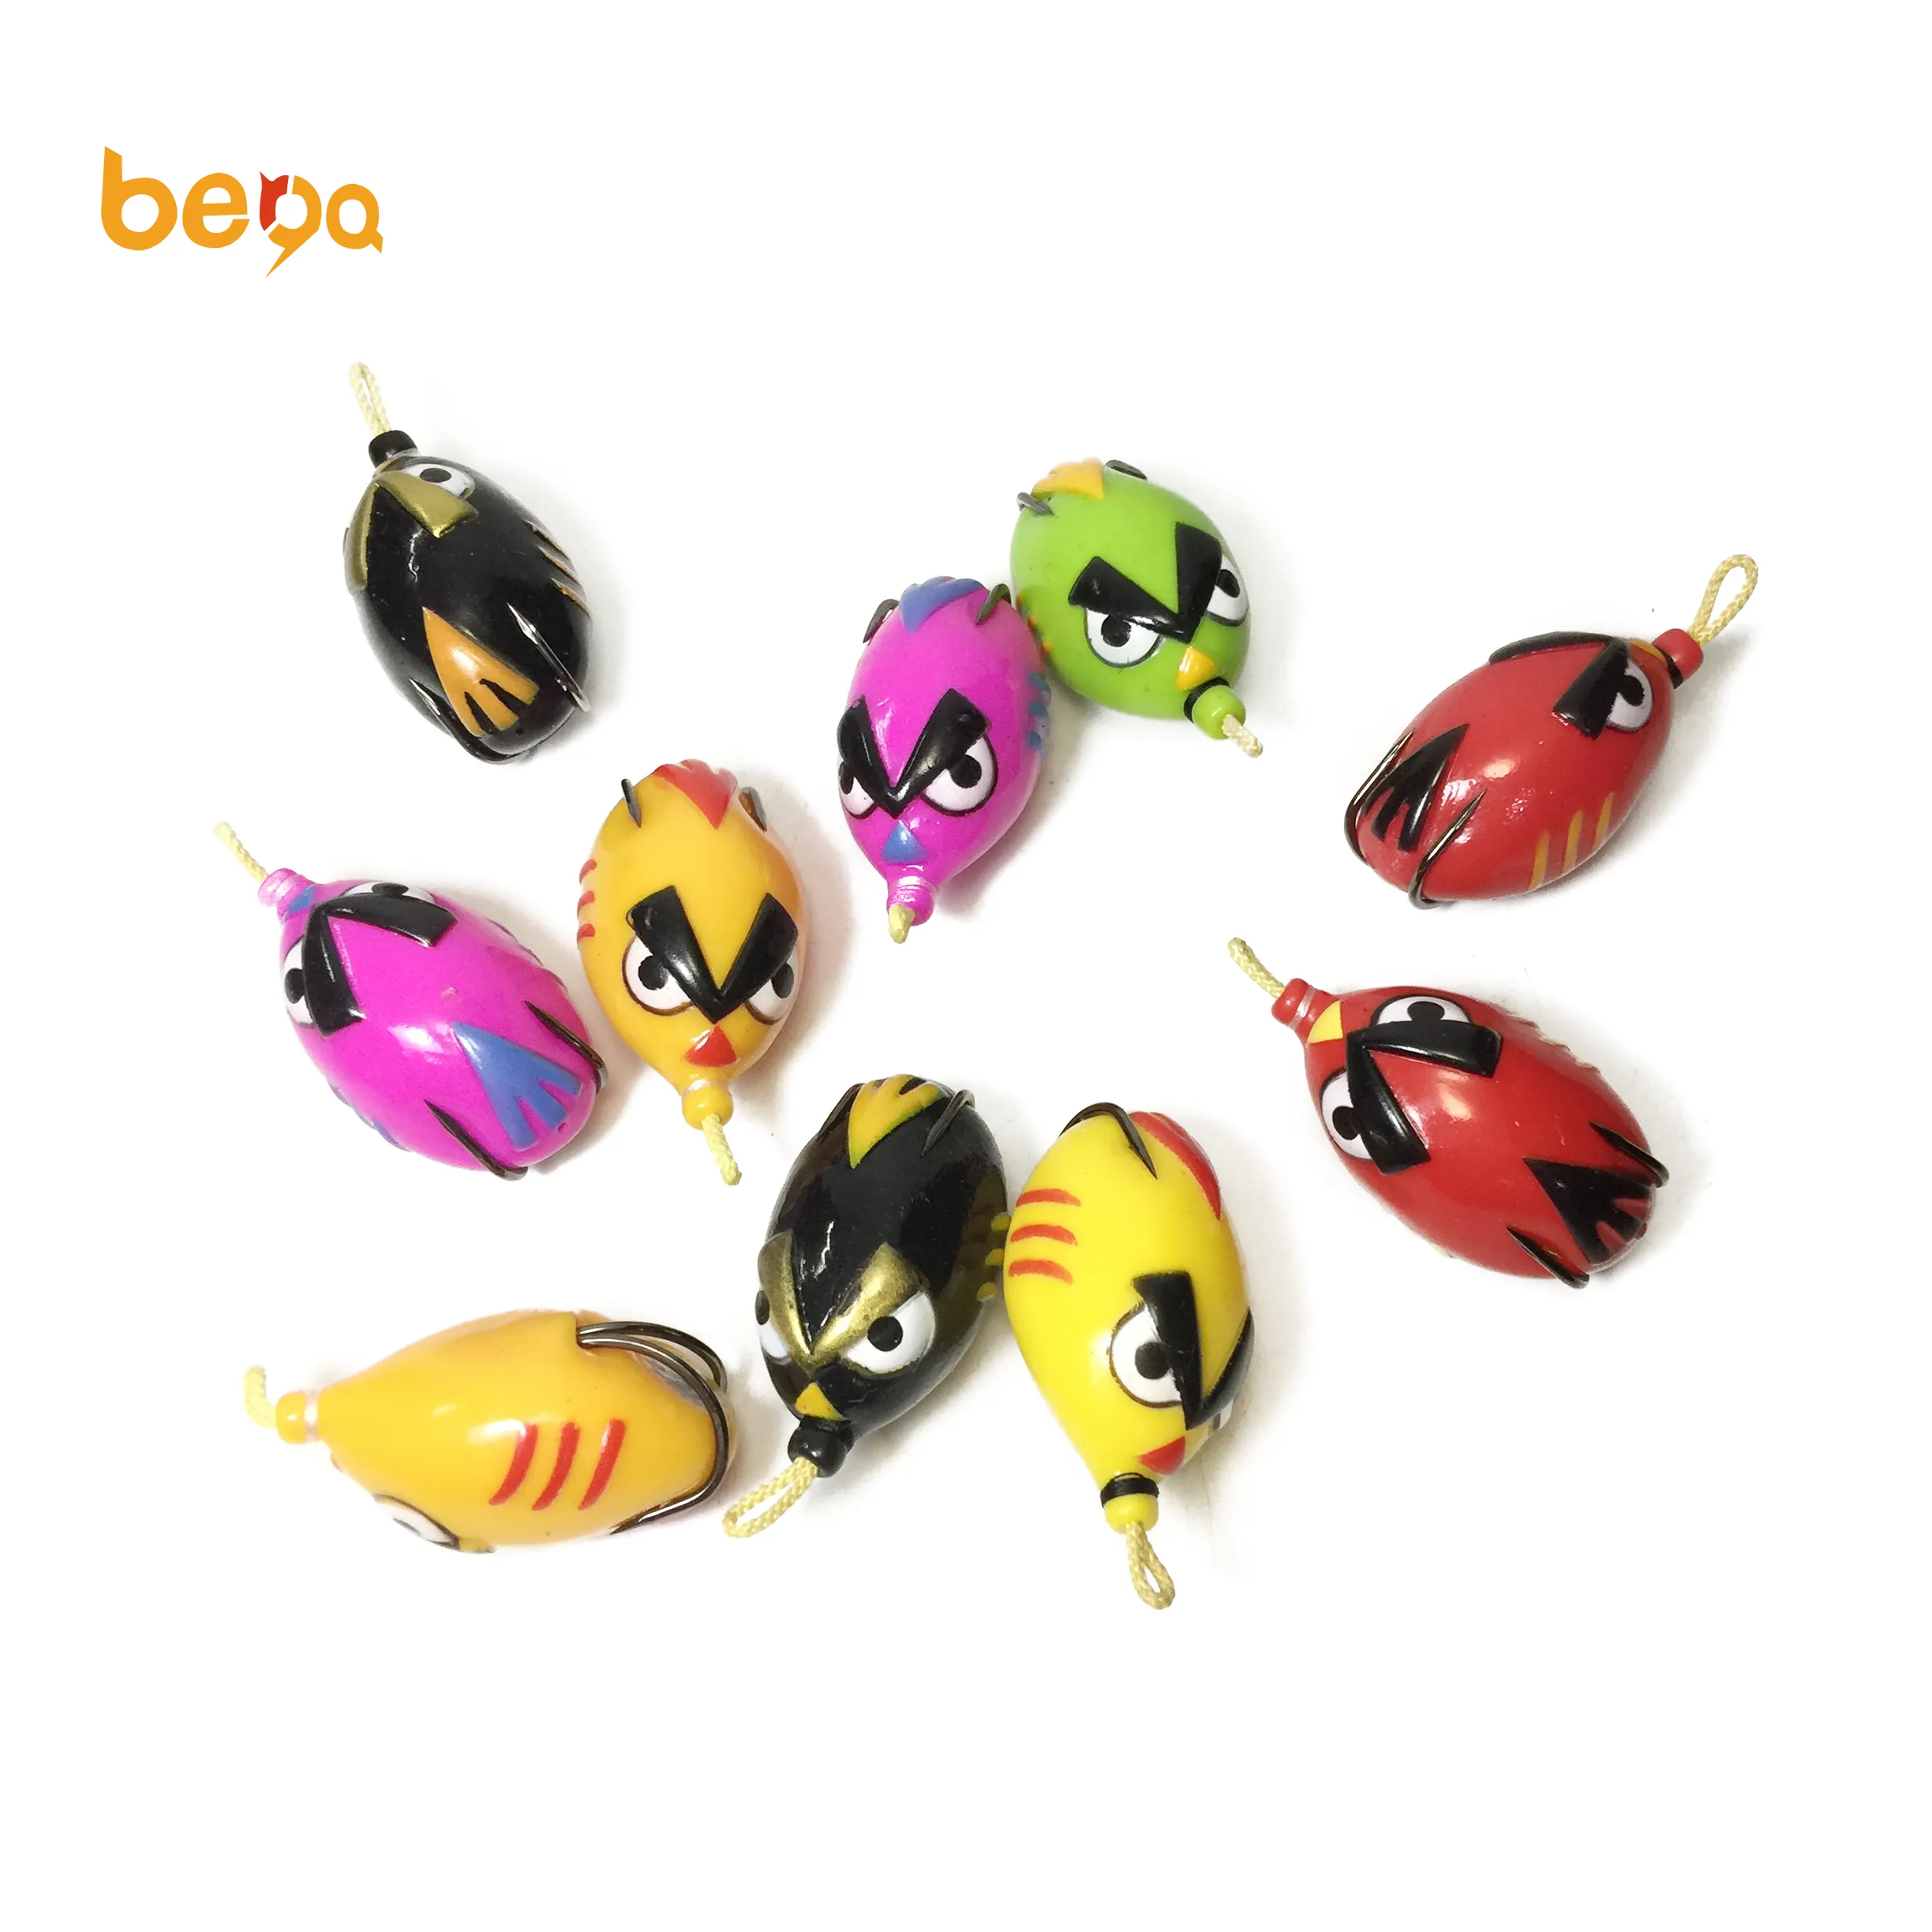 Soft Birds Rubber Ball Baits Top Water Soft Fish Lure China Fishing Tackle Wholesale Bass Fishing Bait